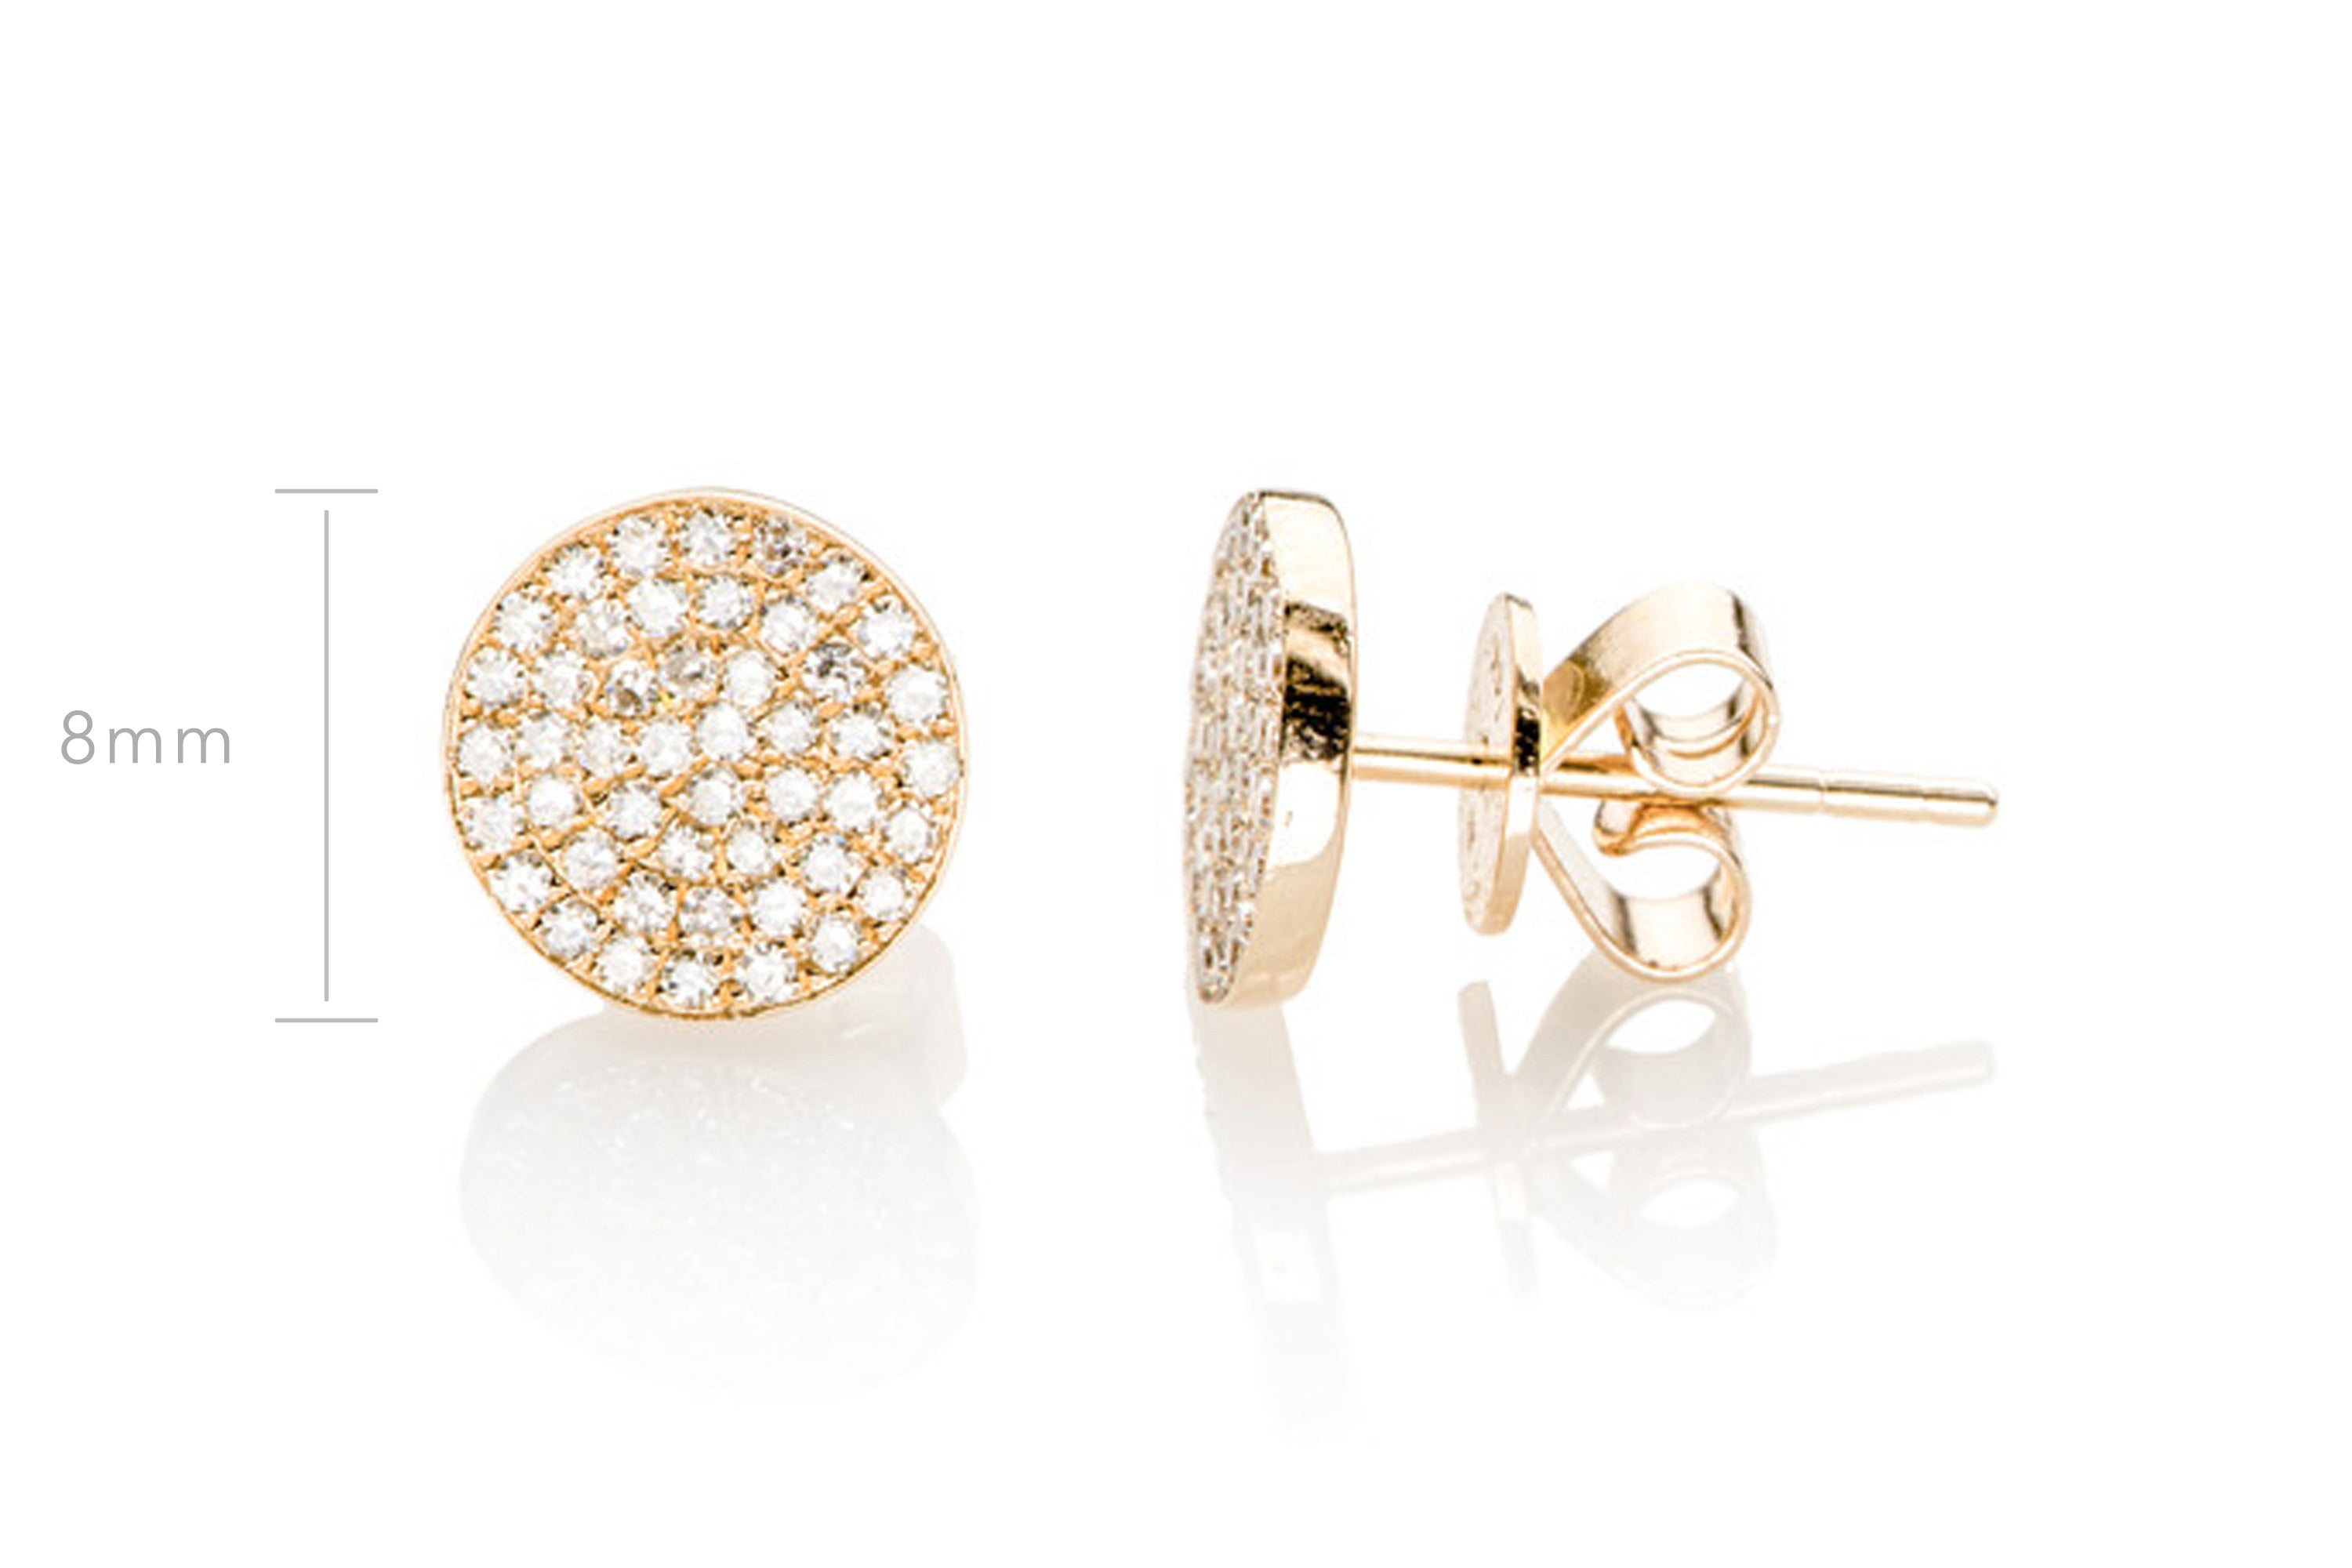 Diamond Disc Stud Earring in 14k yellow gold with height measurement of 8mm